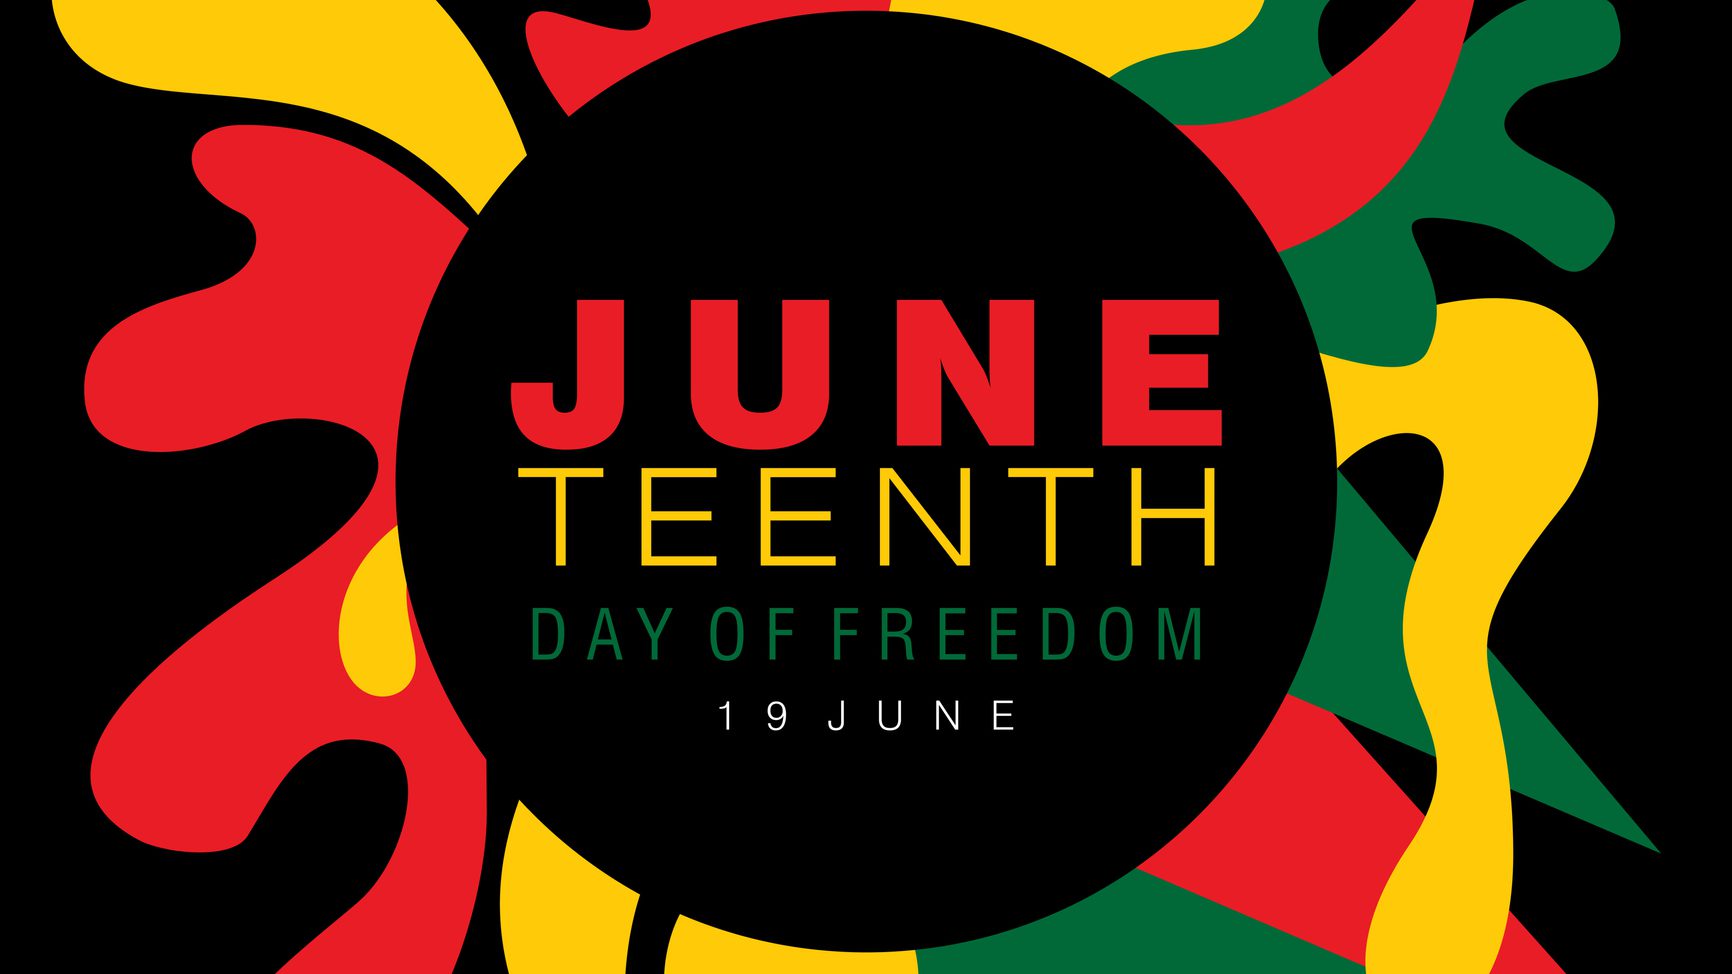 Juneteenth graphic image with simple typography on a splash of abstract designs in national colors